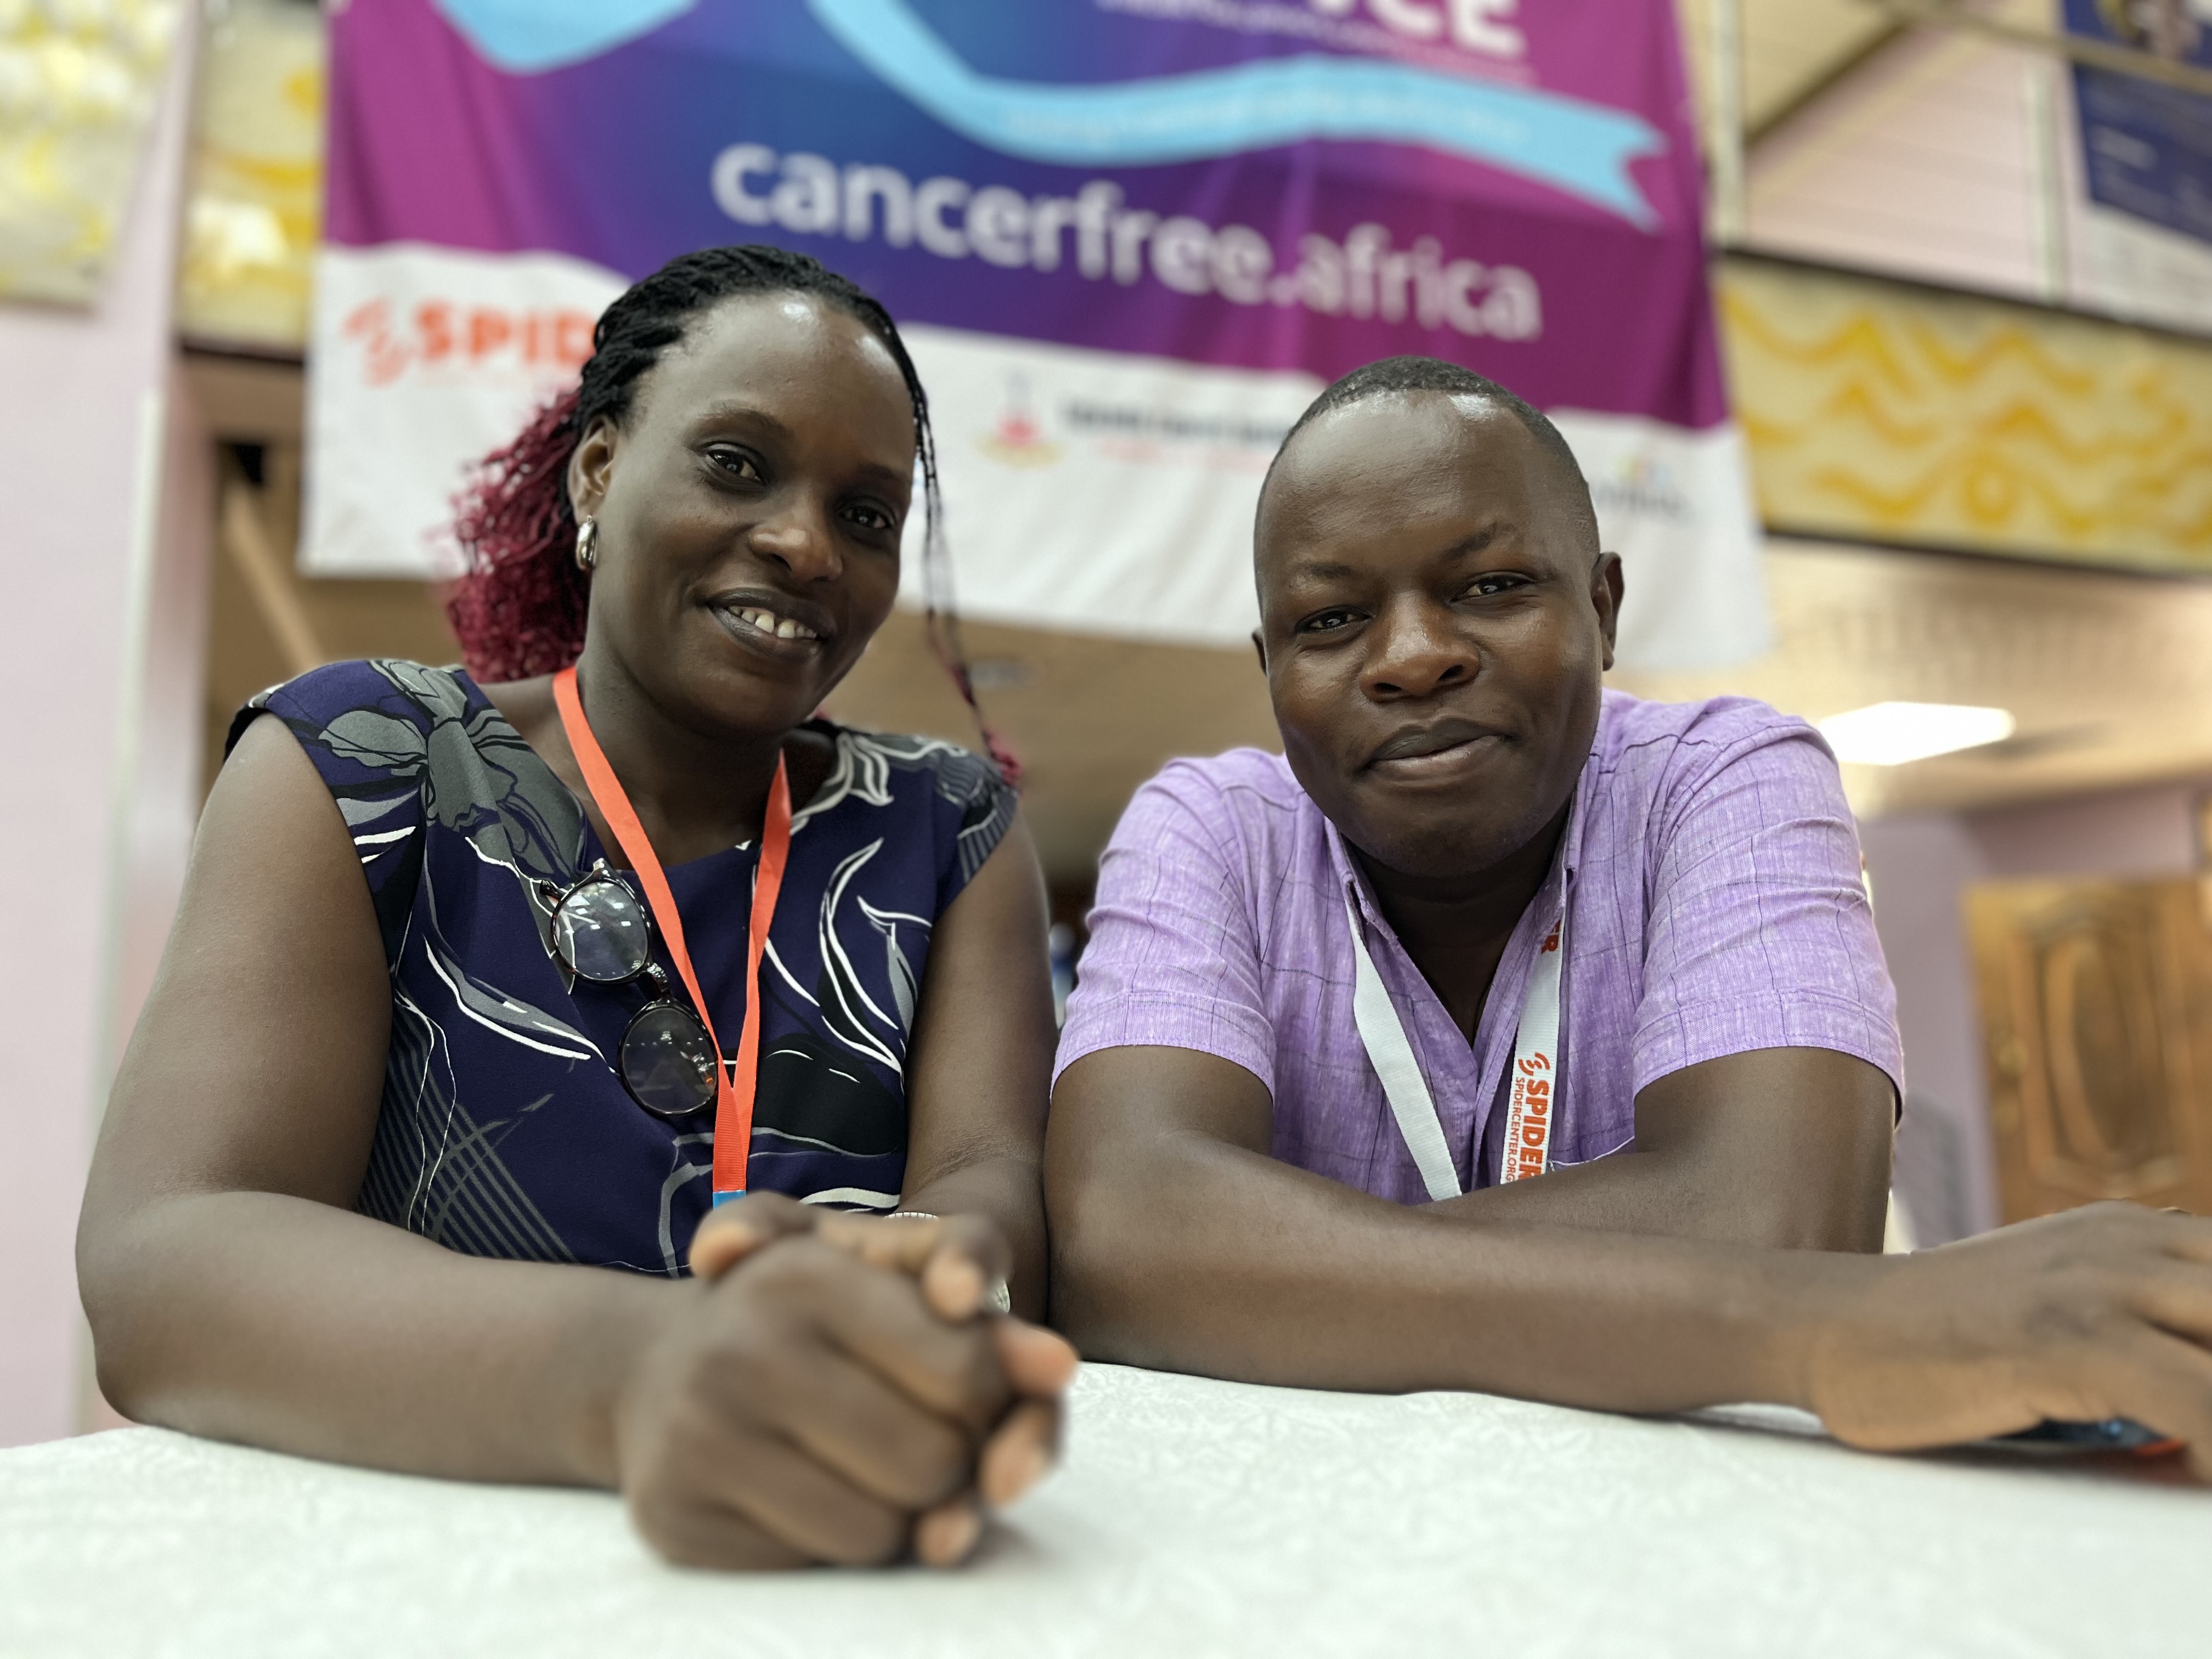 A smiling lady and a smiling gentlemen in professional clothing are standing by a table at a conference where a campaign banner is visible in the background with a weblink to cancerfree.africa.